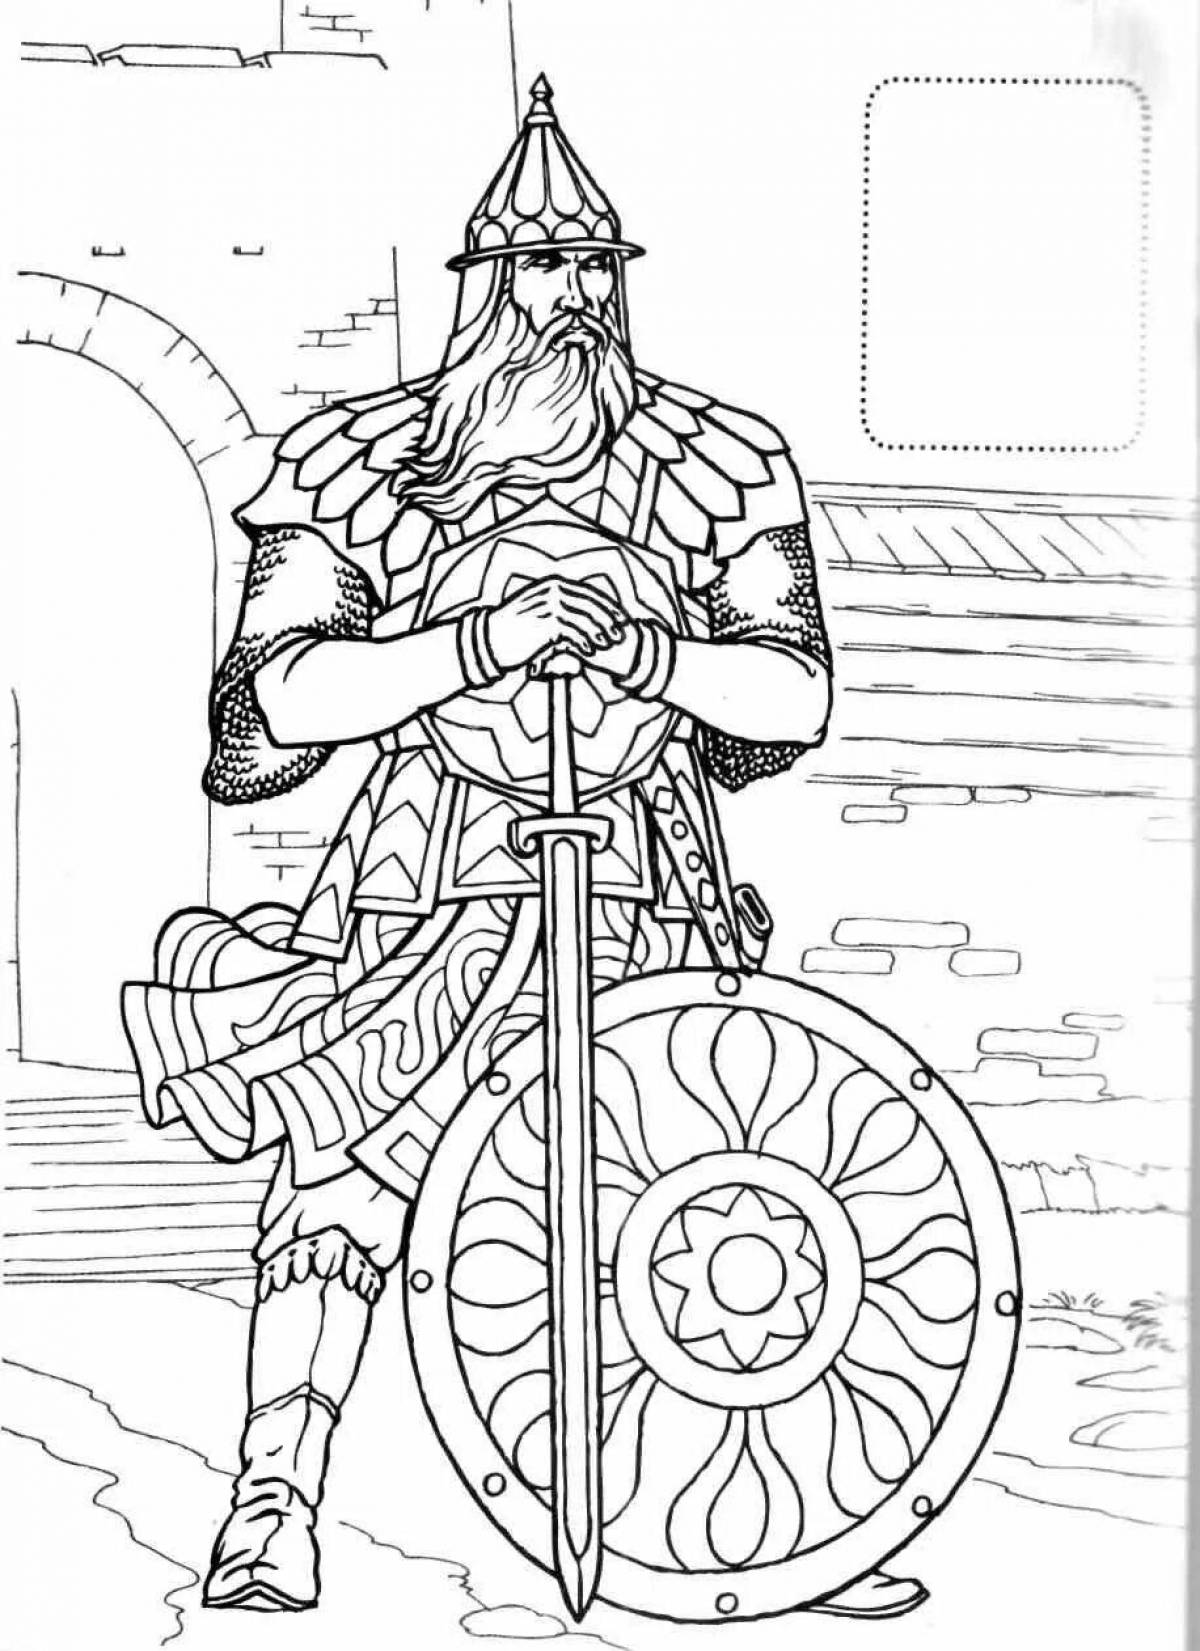 Awesome Russian Warrior coloring book